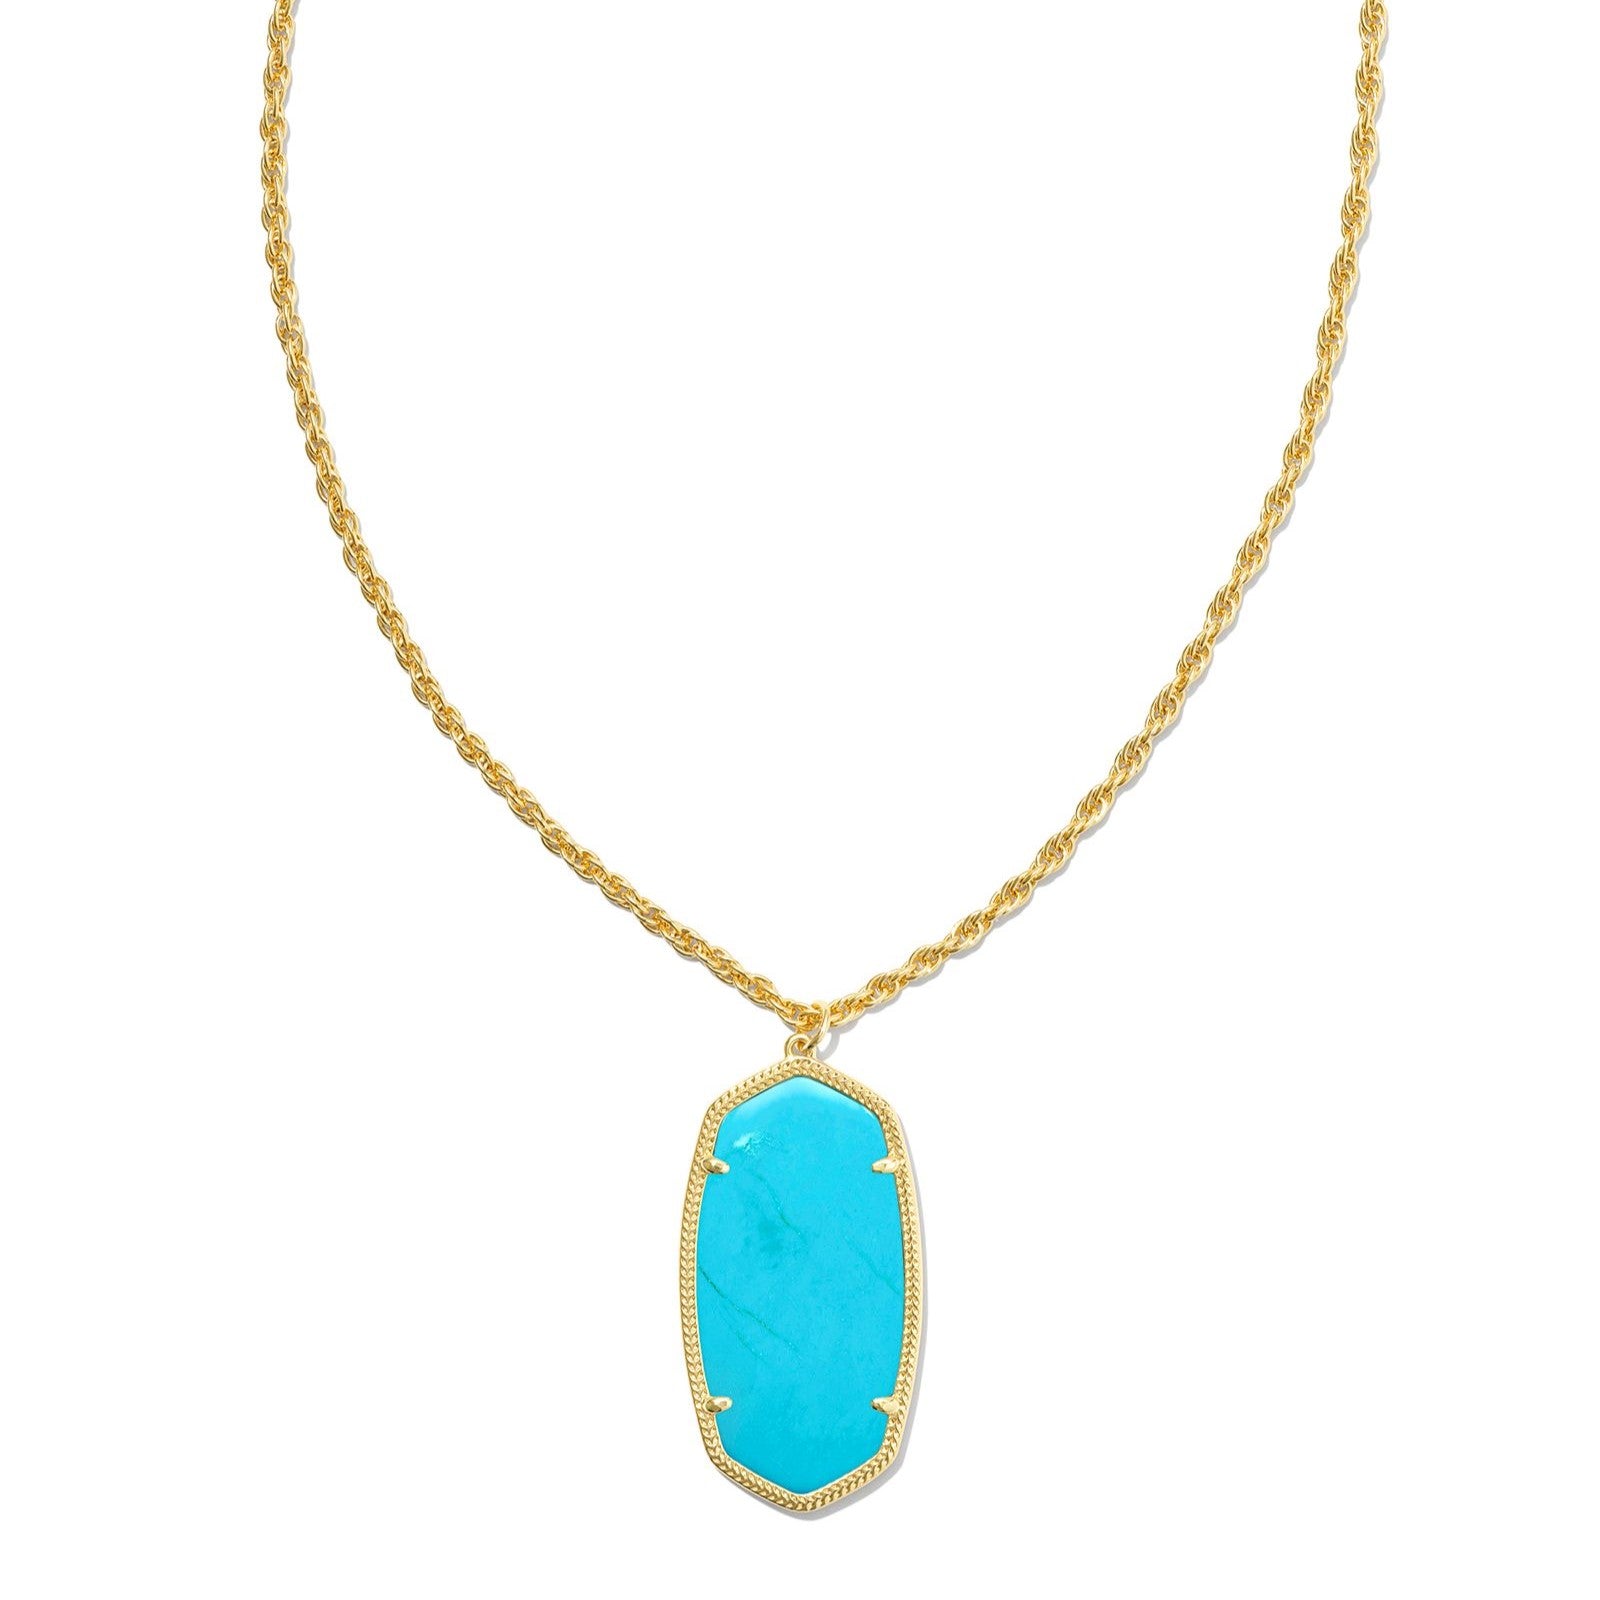 Kendra Scott | Rae Gold Long Pendant Necklace in Variegated Turquoise Magnesite - Giddy Up Glamour Boutique